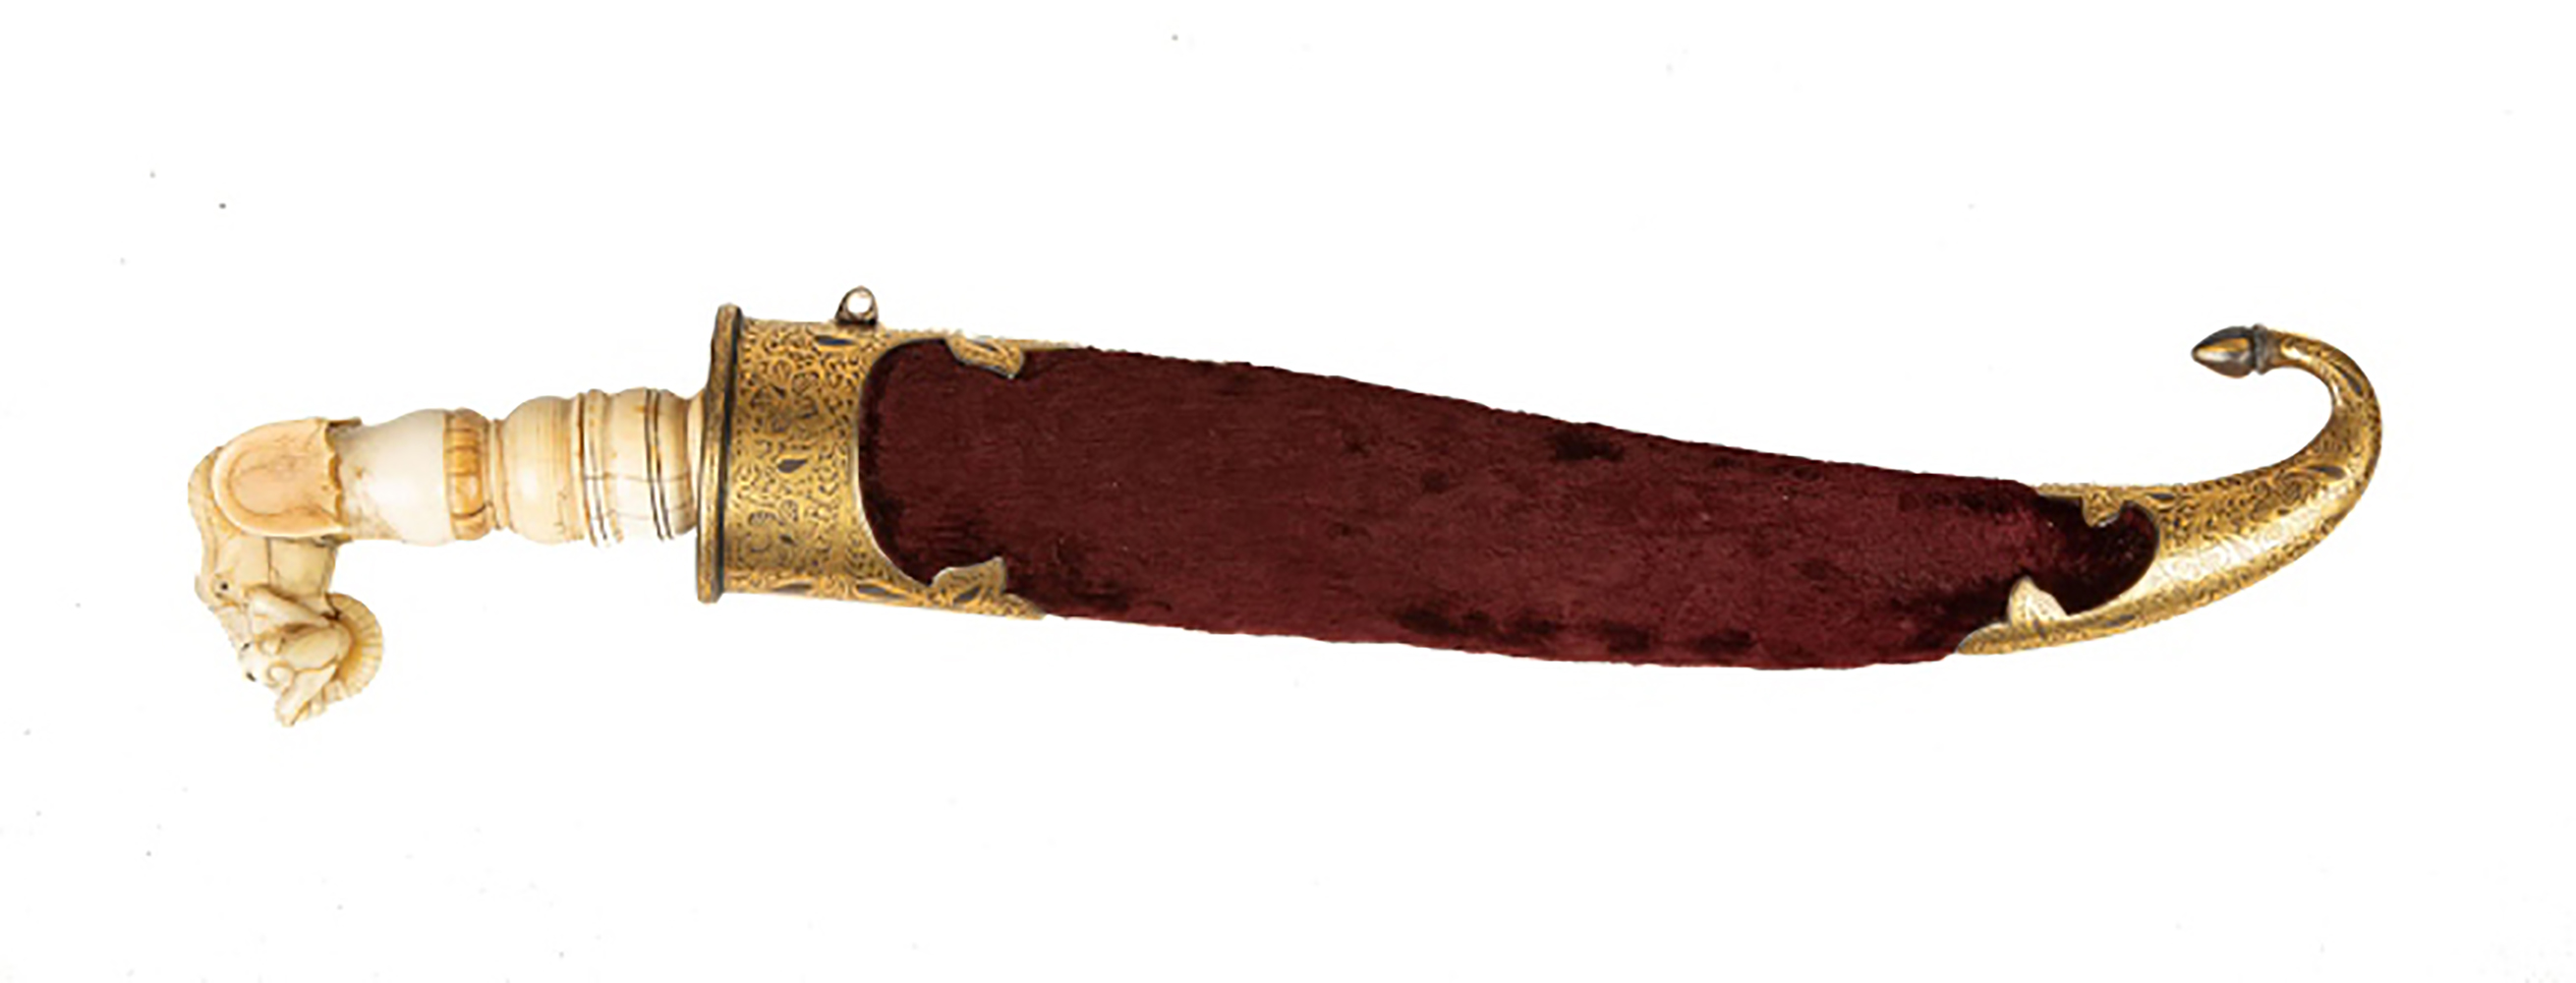 MUGHAL DAGGER 19th century, with